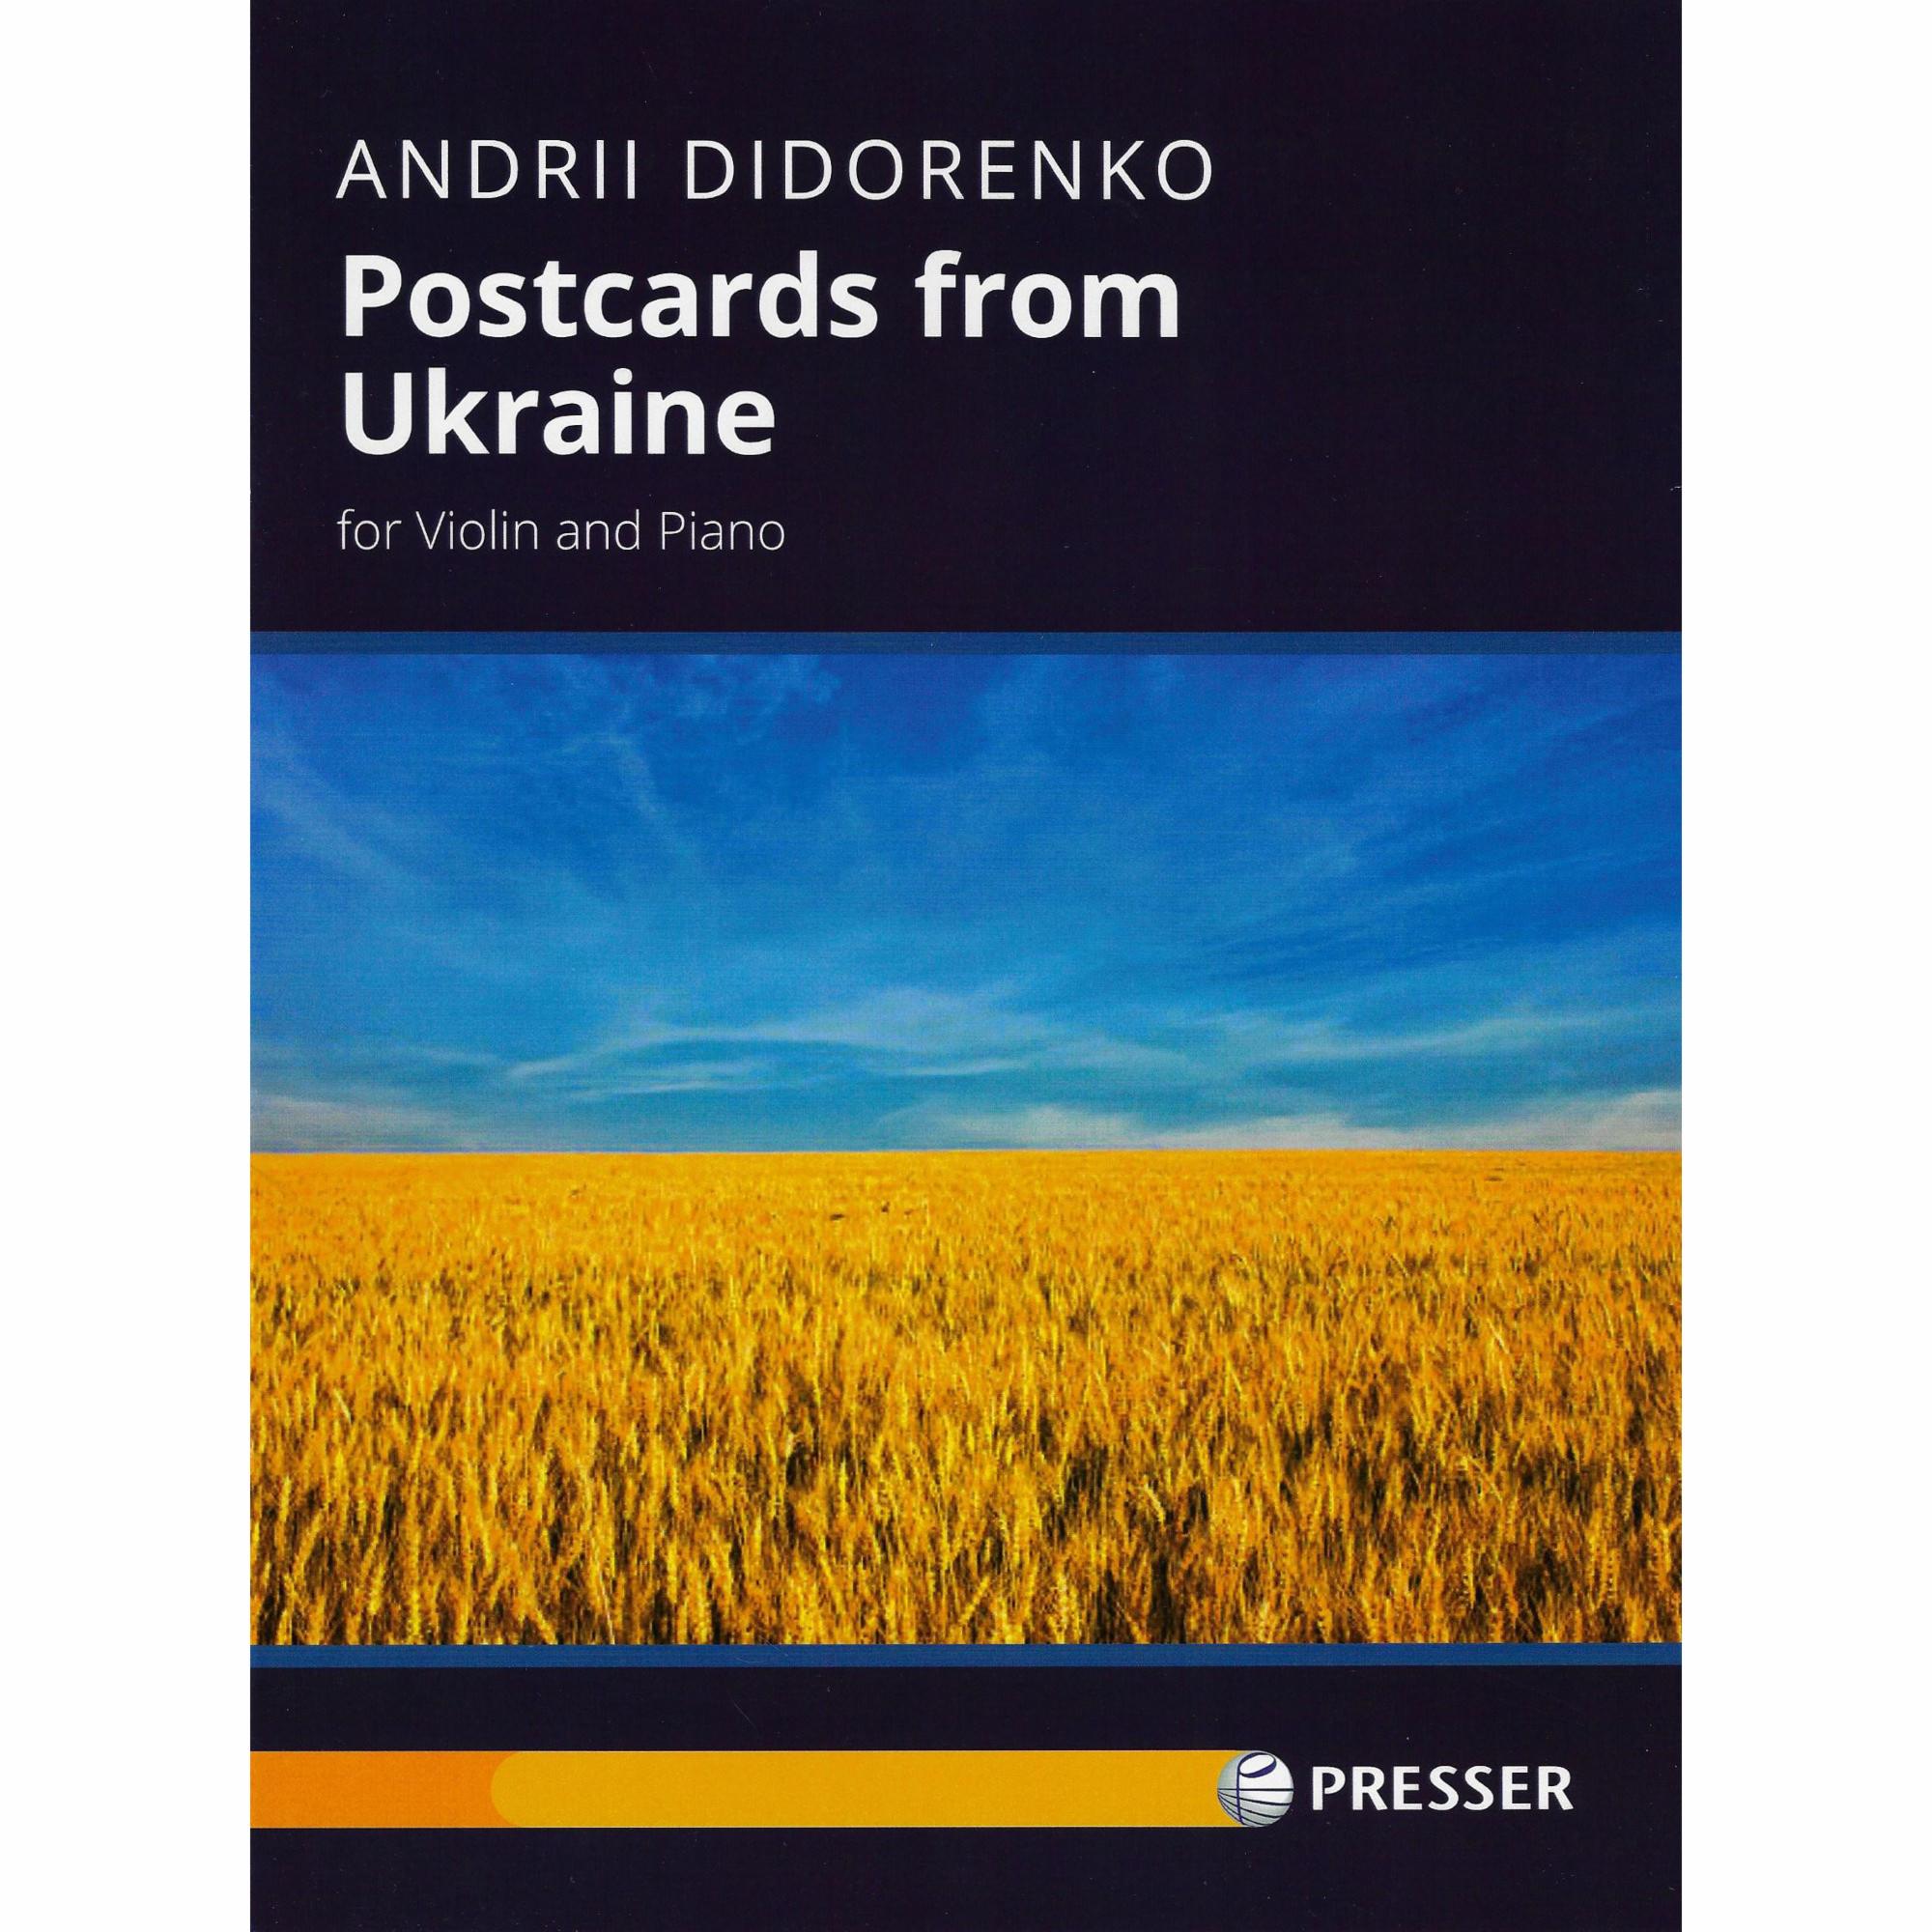 Didorenko -- Postcards from Ukraine for Violin and Piano